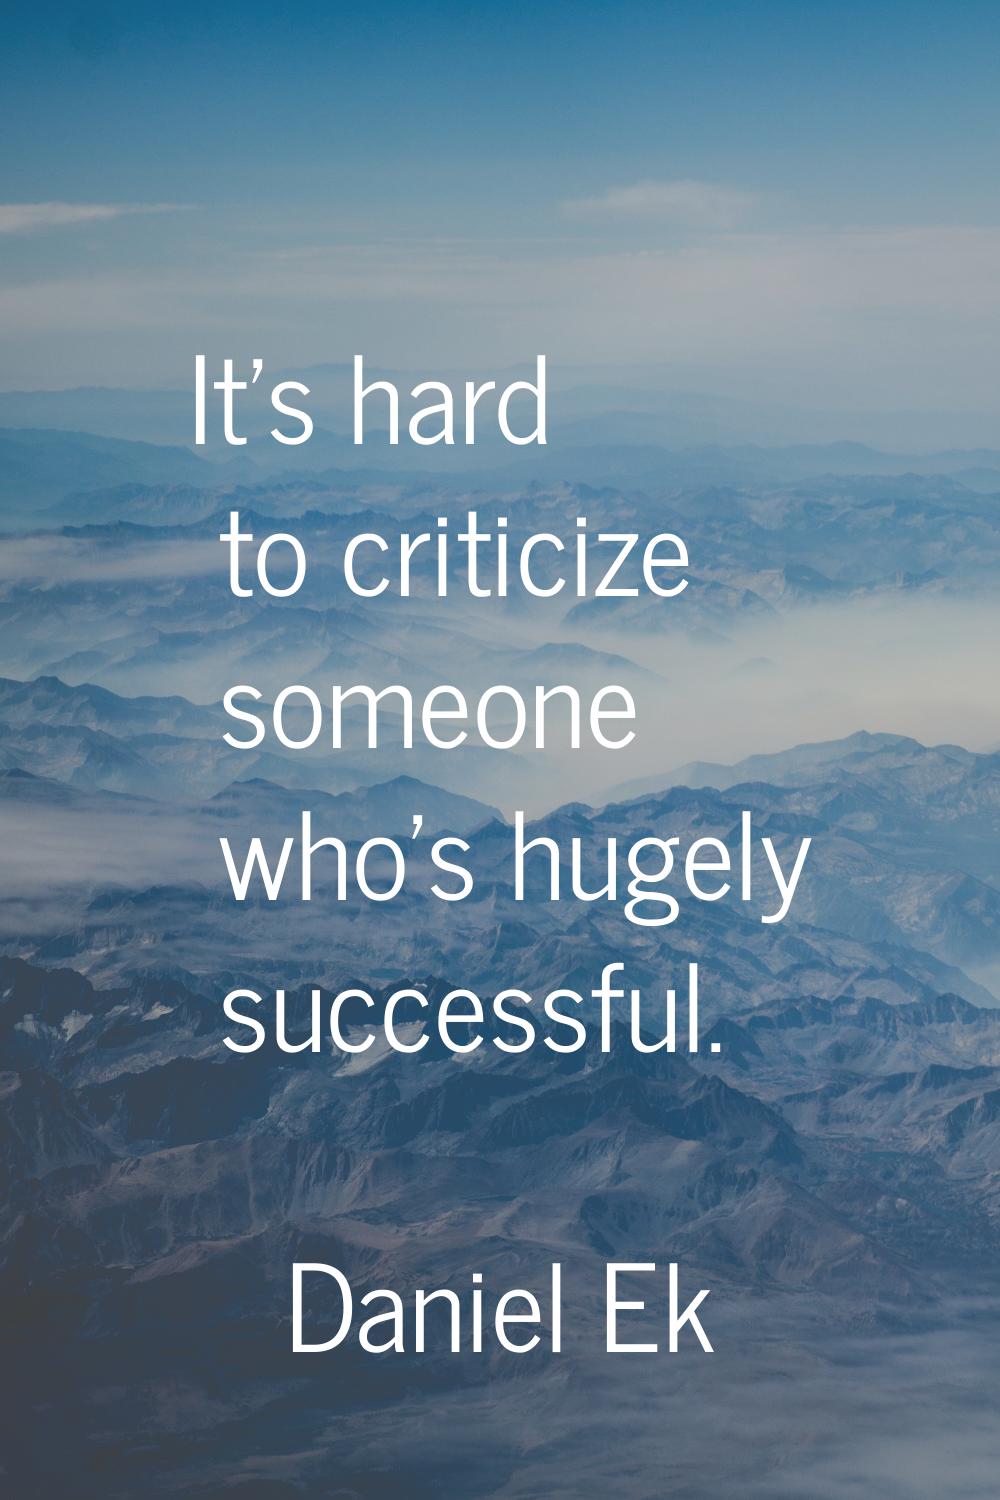 It's hard to criticize someone who's hugely successful.